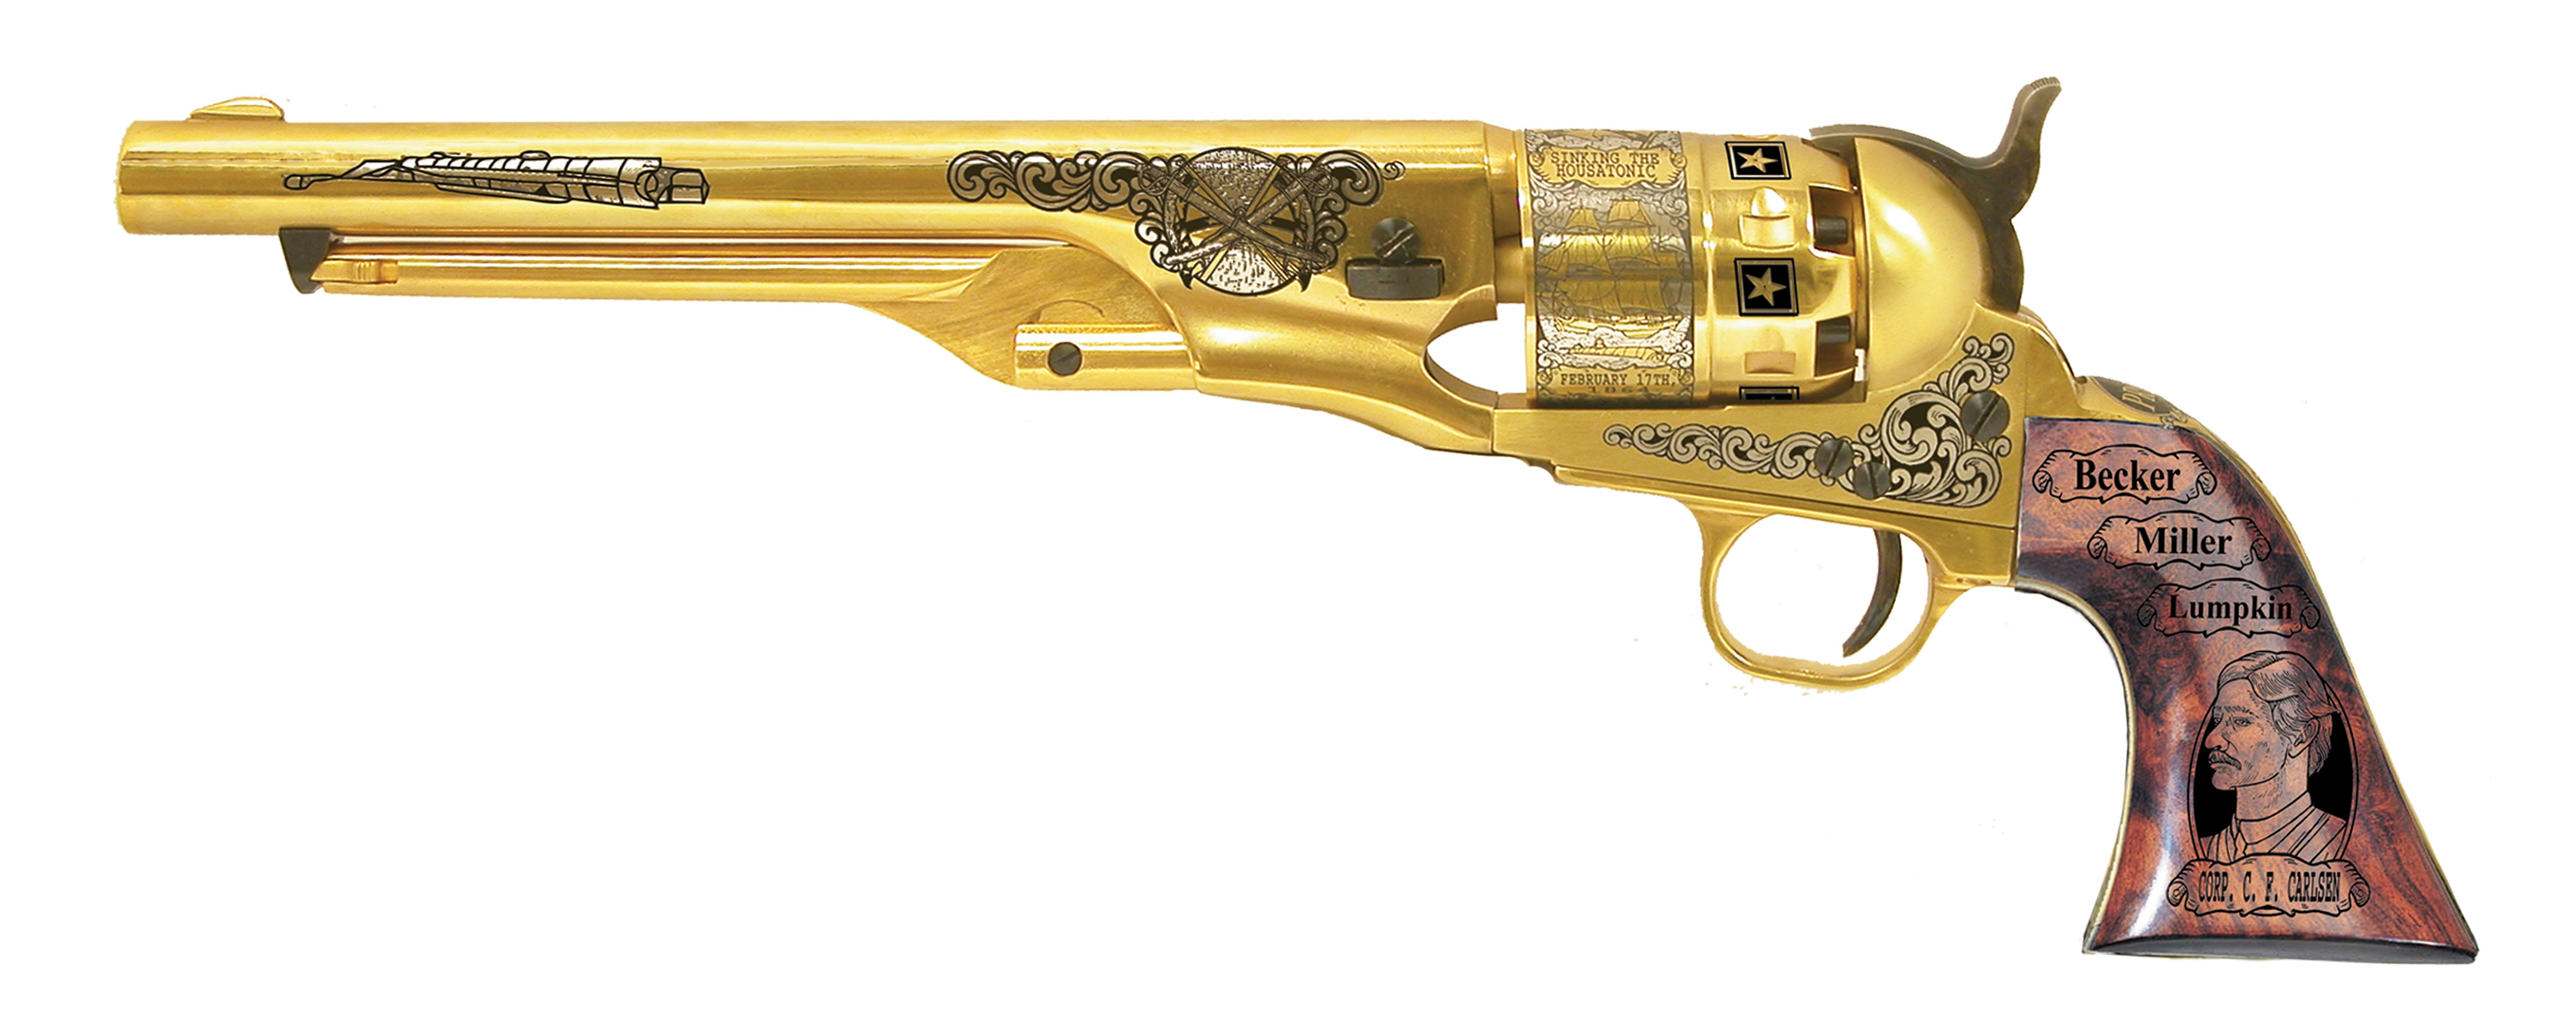 Weapons H.L. Hunley Revolver HD Wallpaper | Background Image